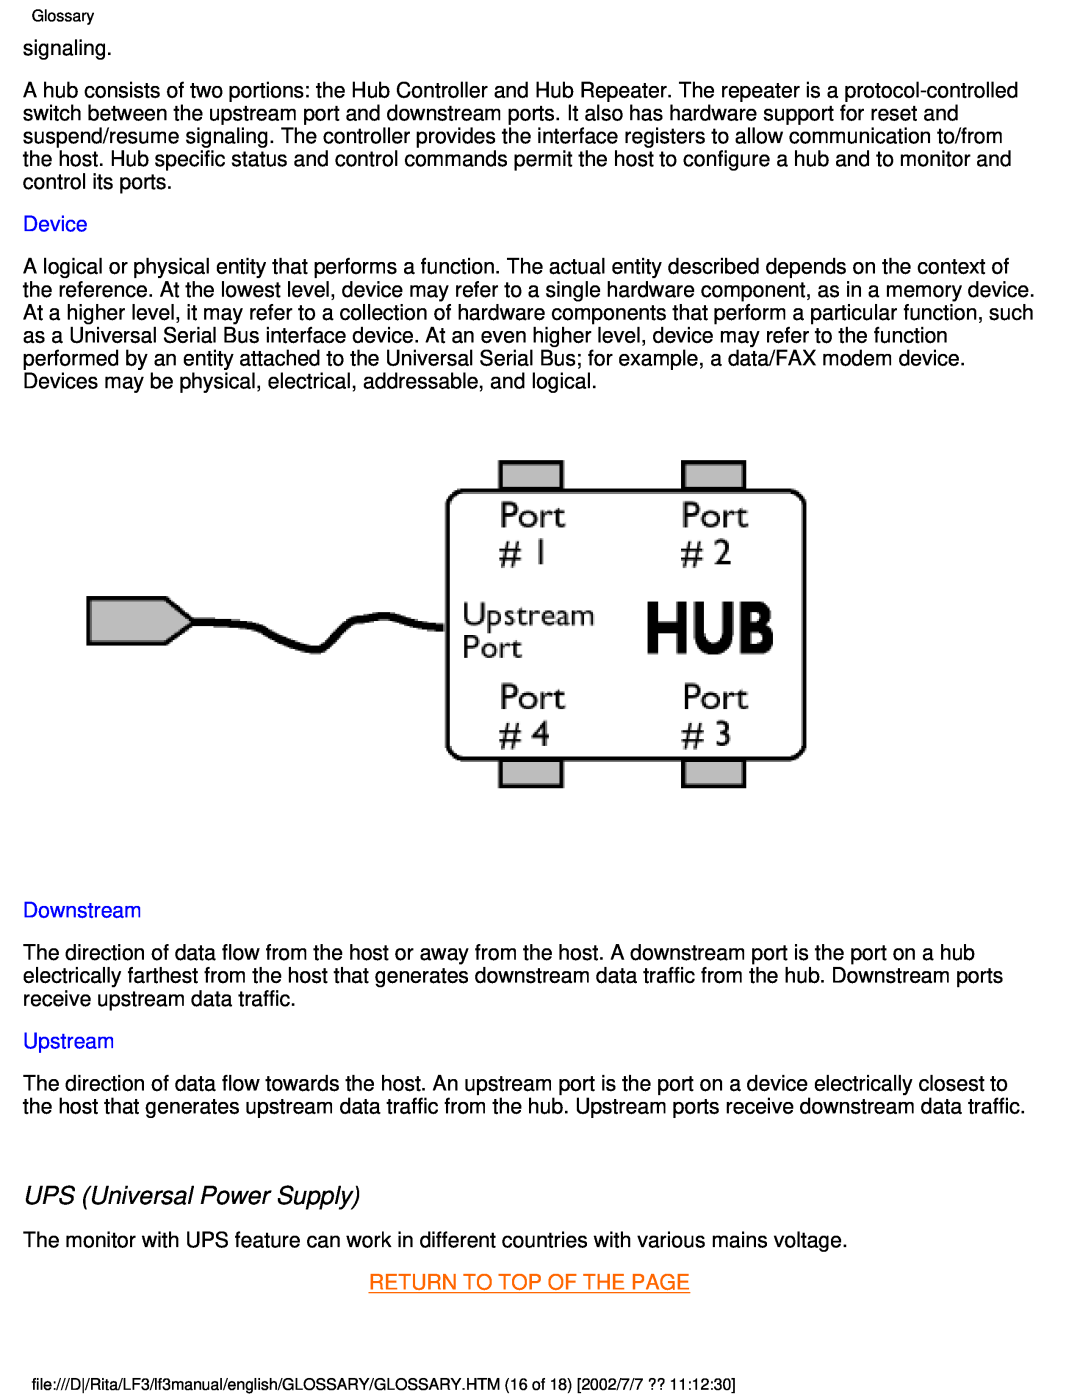 Philips 107T41 user manual UPS Universal Power Supply, Device, Downstream, Upstream, Return To Top Of The Page 